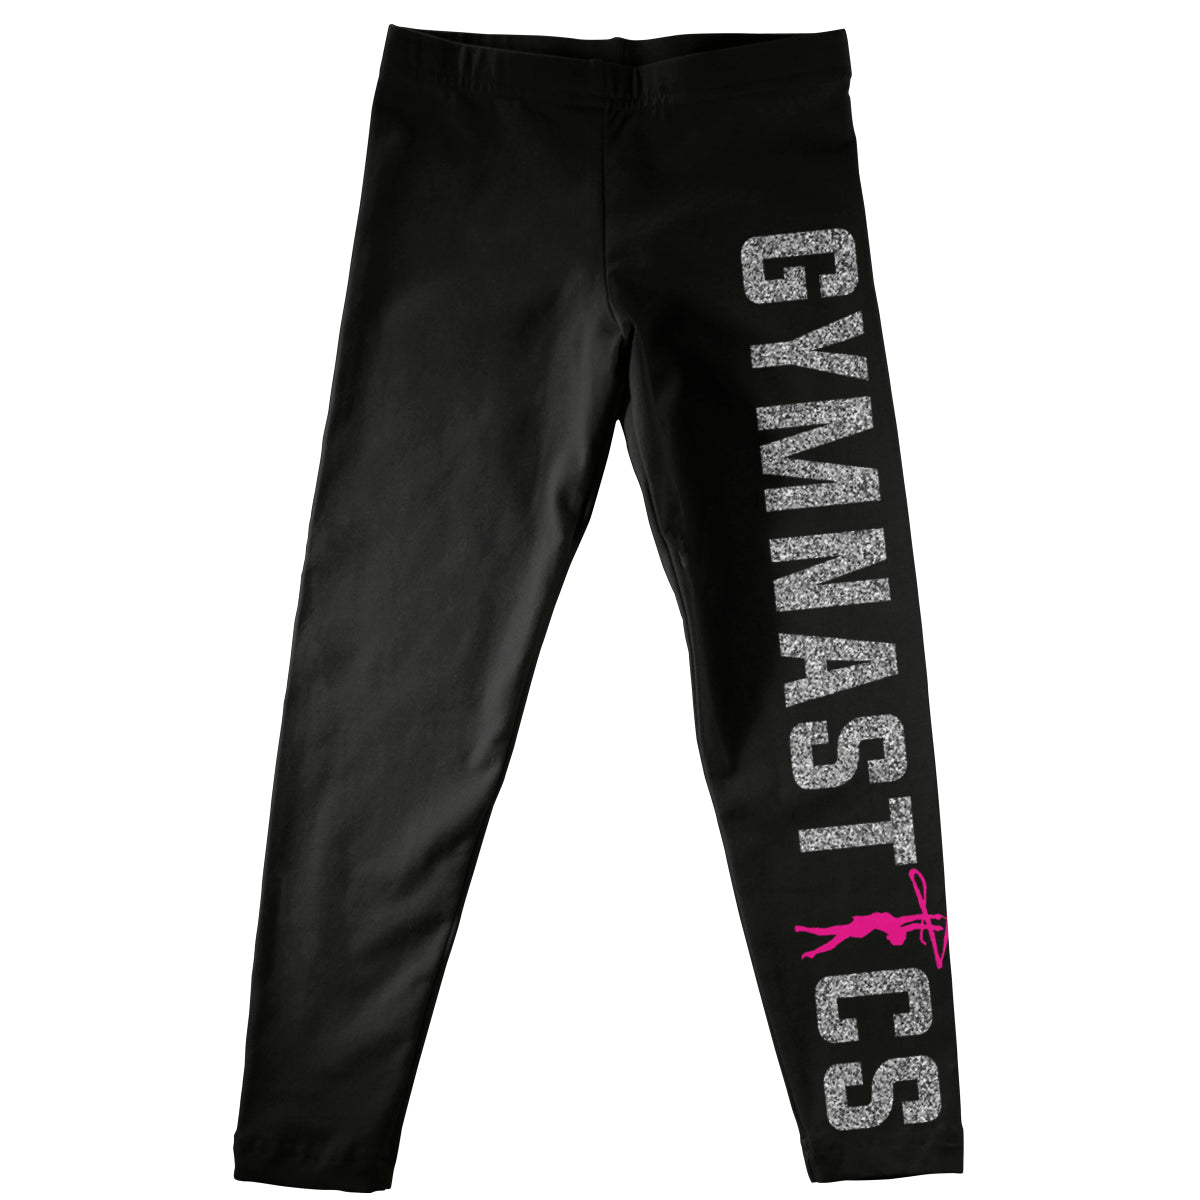 Black and pink gymnast silhouetter girls leggings - Wimziy&Co.